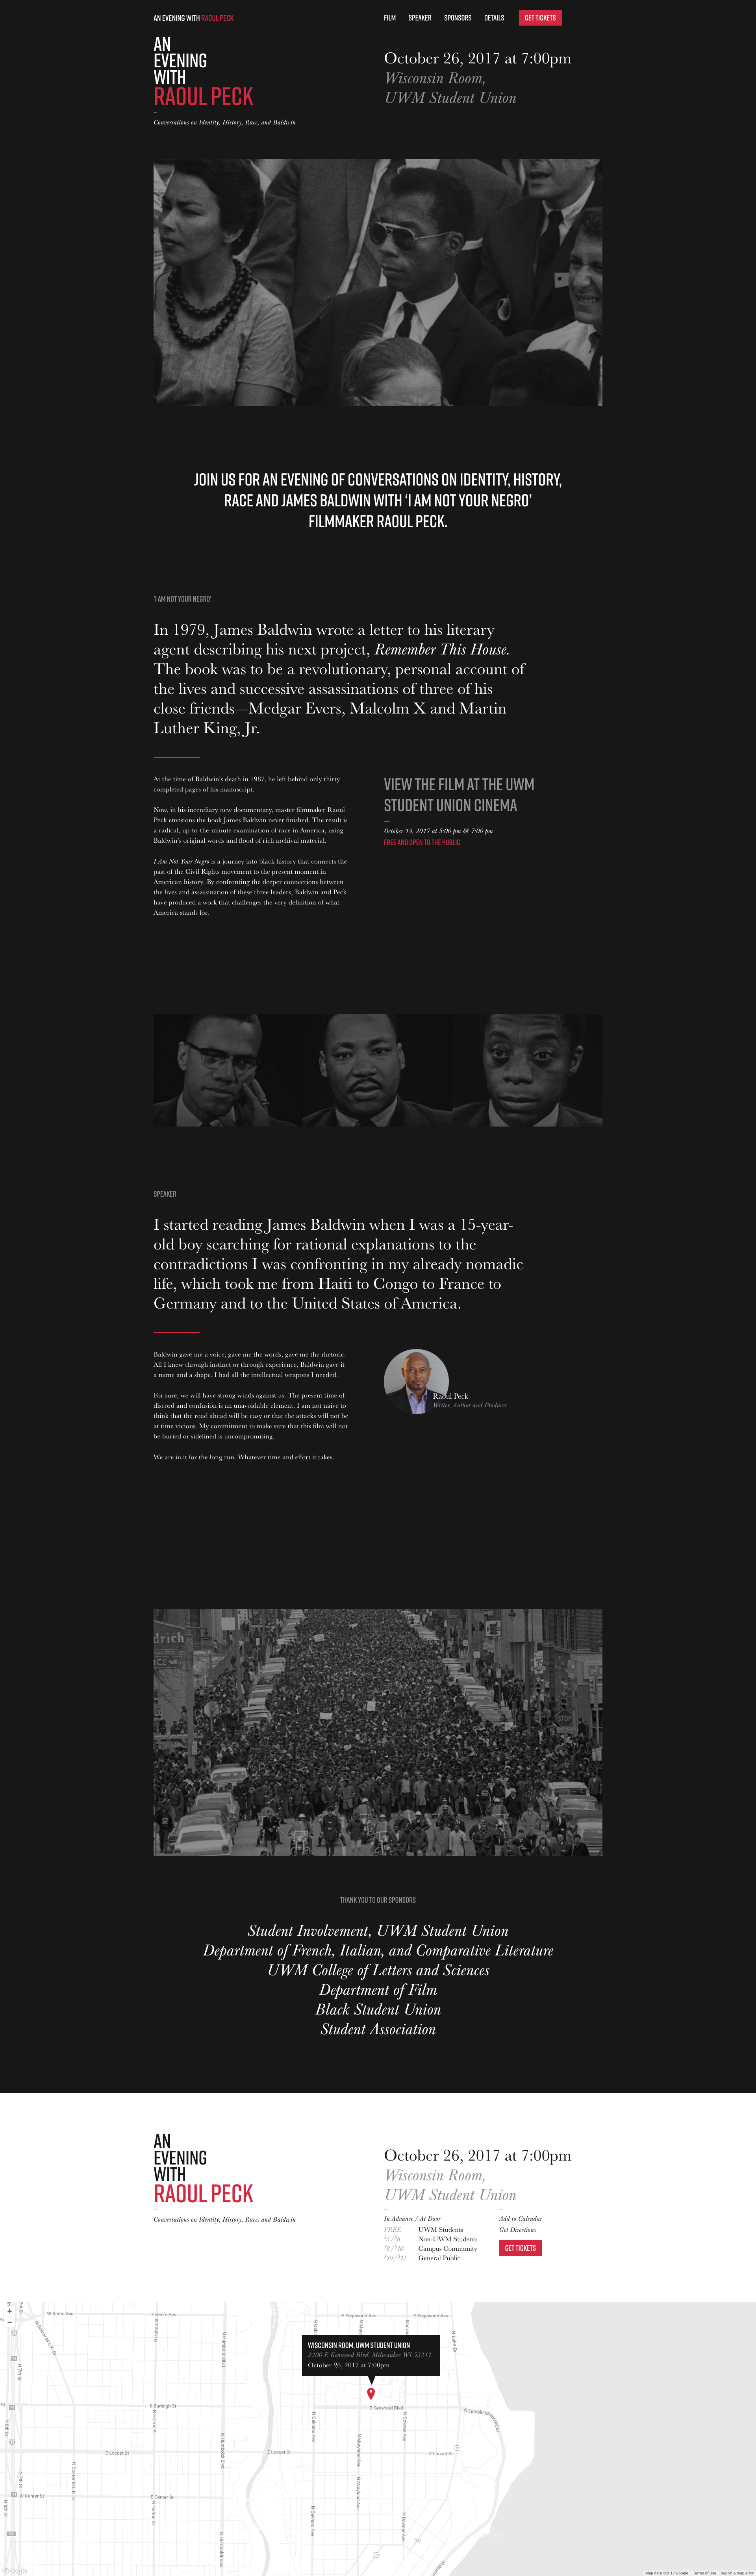 Neue Now Design Co / Dave Kriebel / The Race in Place Project / Promotional Event Website for The Race in Place Project's 'An Evening with Raoul Peck'